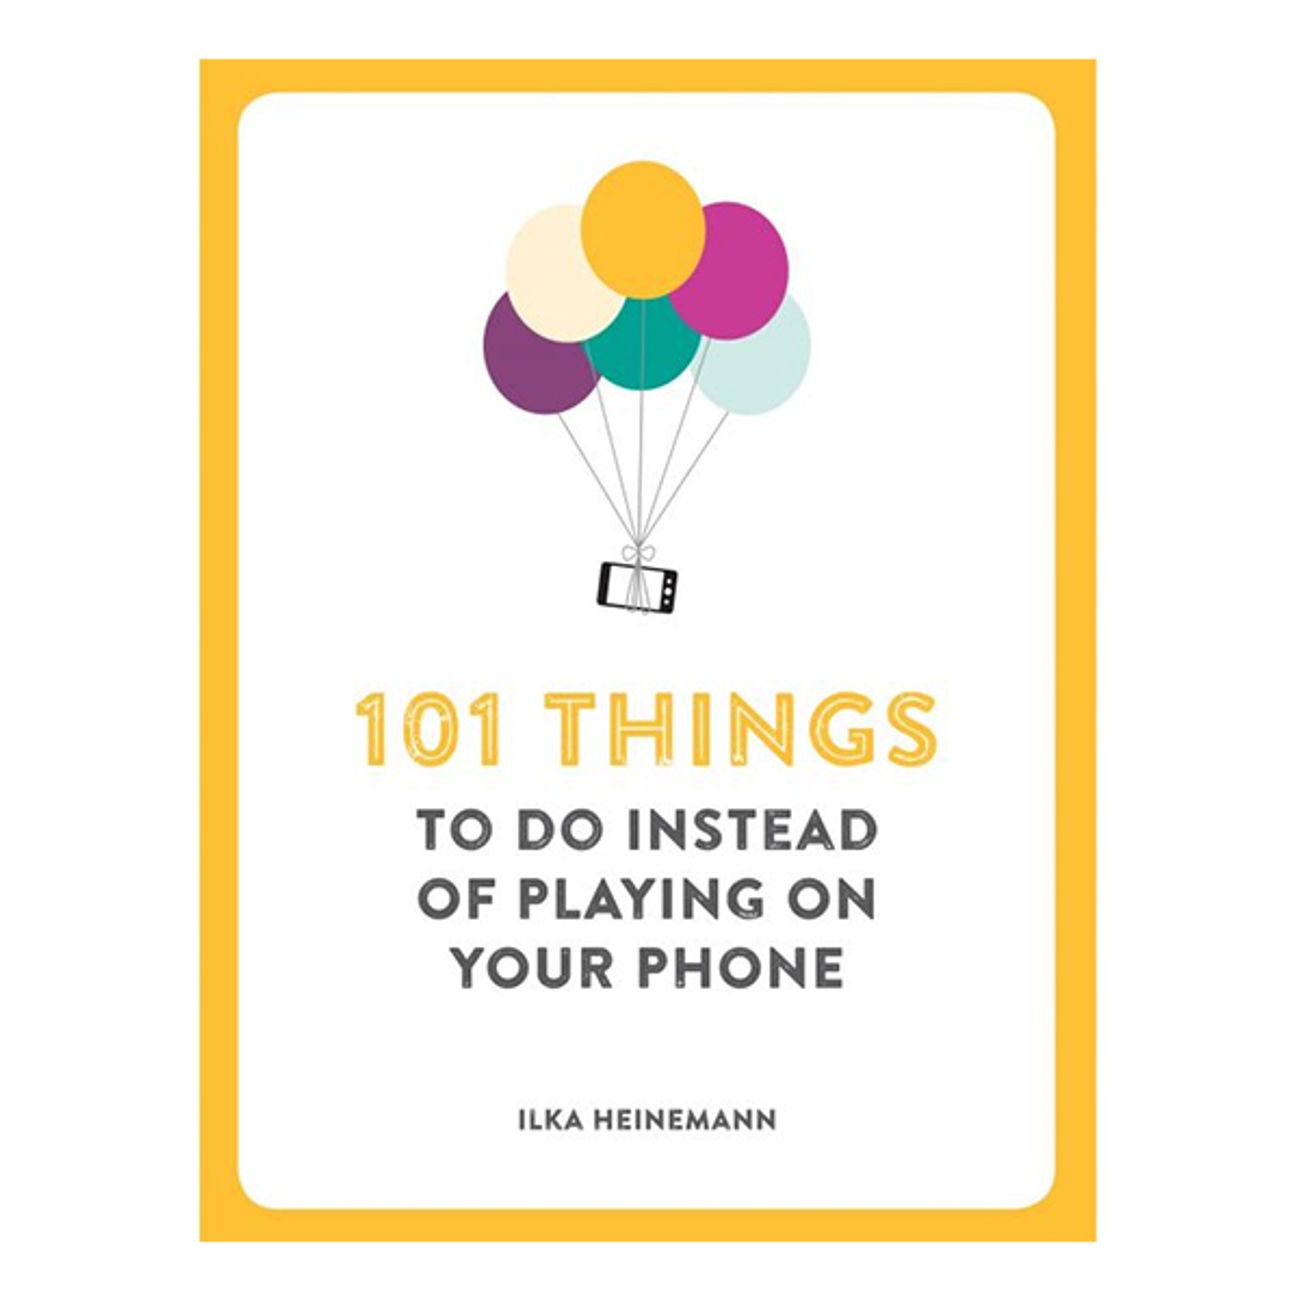 101-things-to-do-instead-of-playing-phone-bok-75707-1